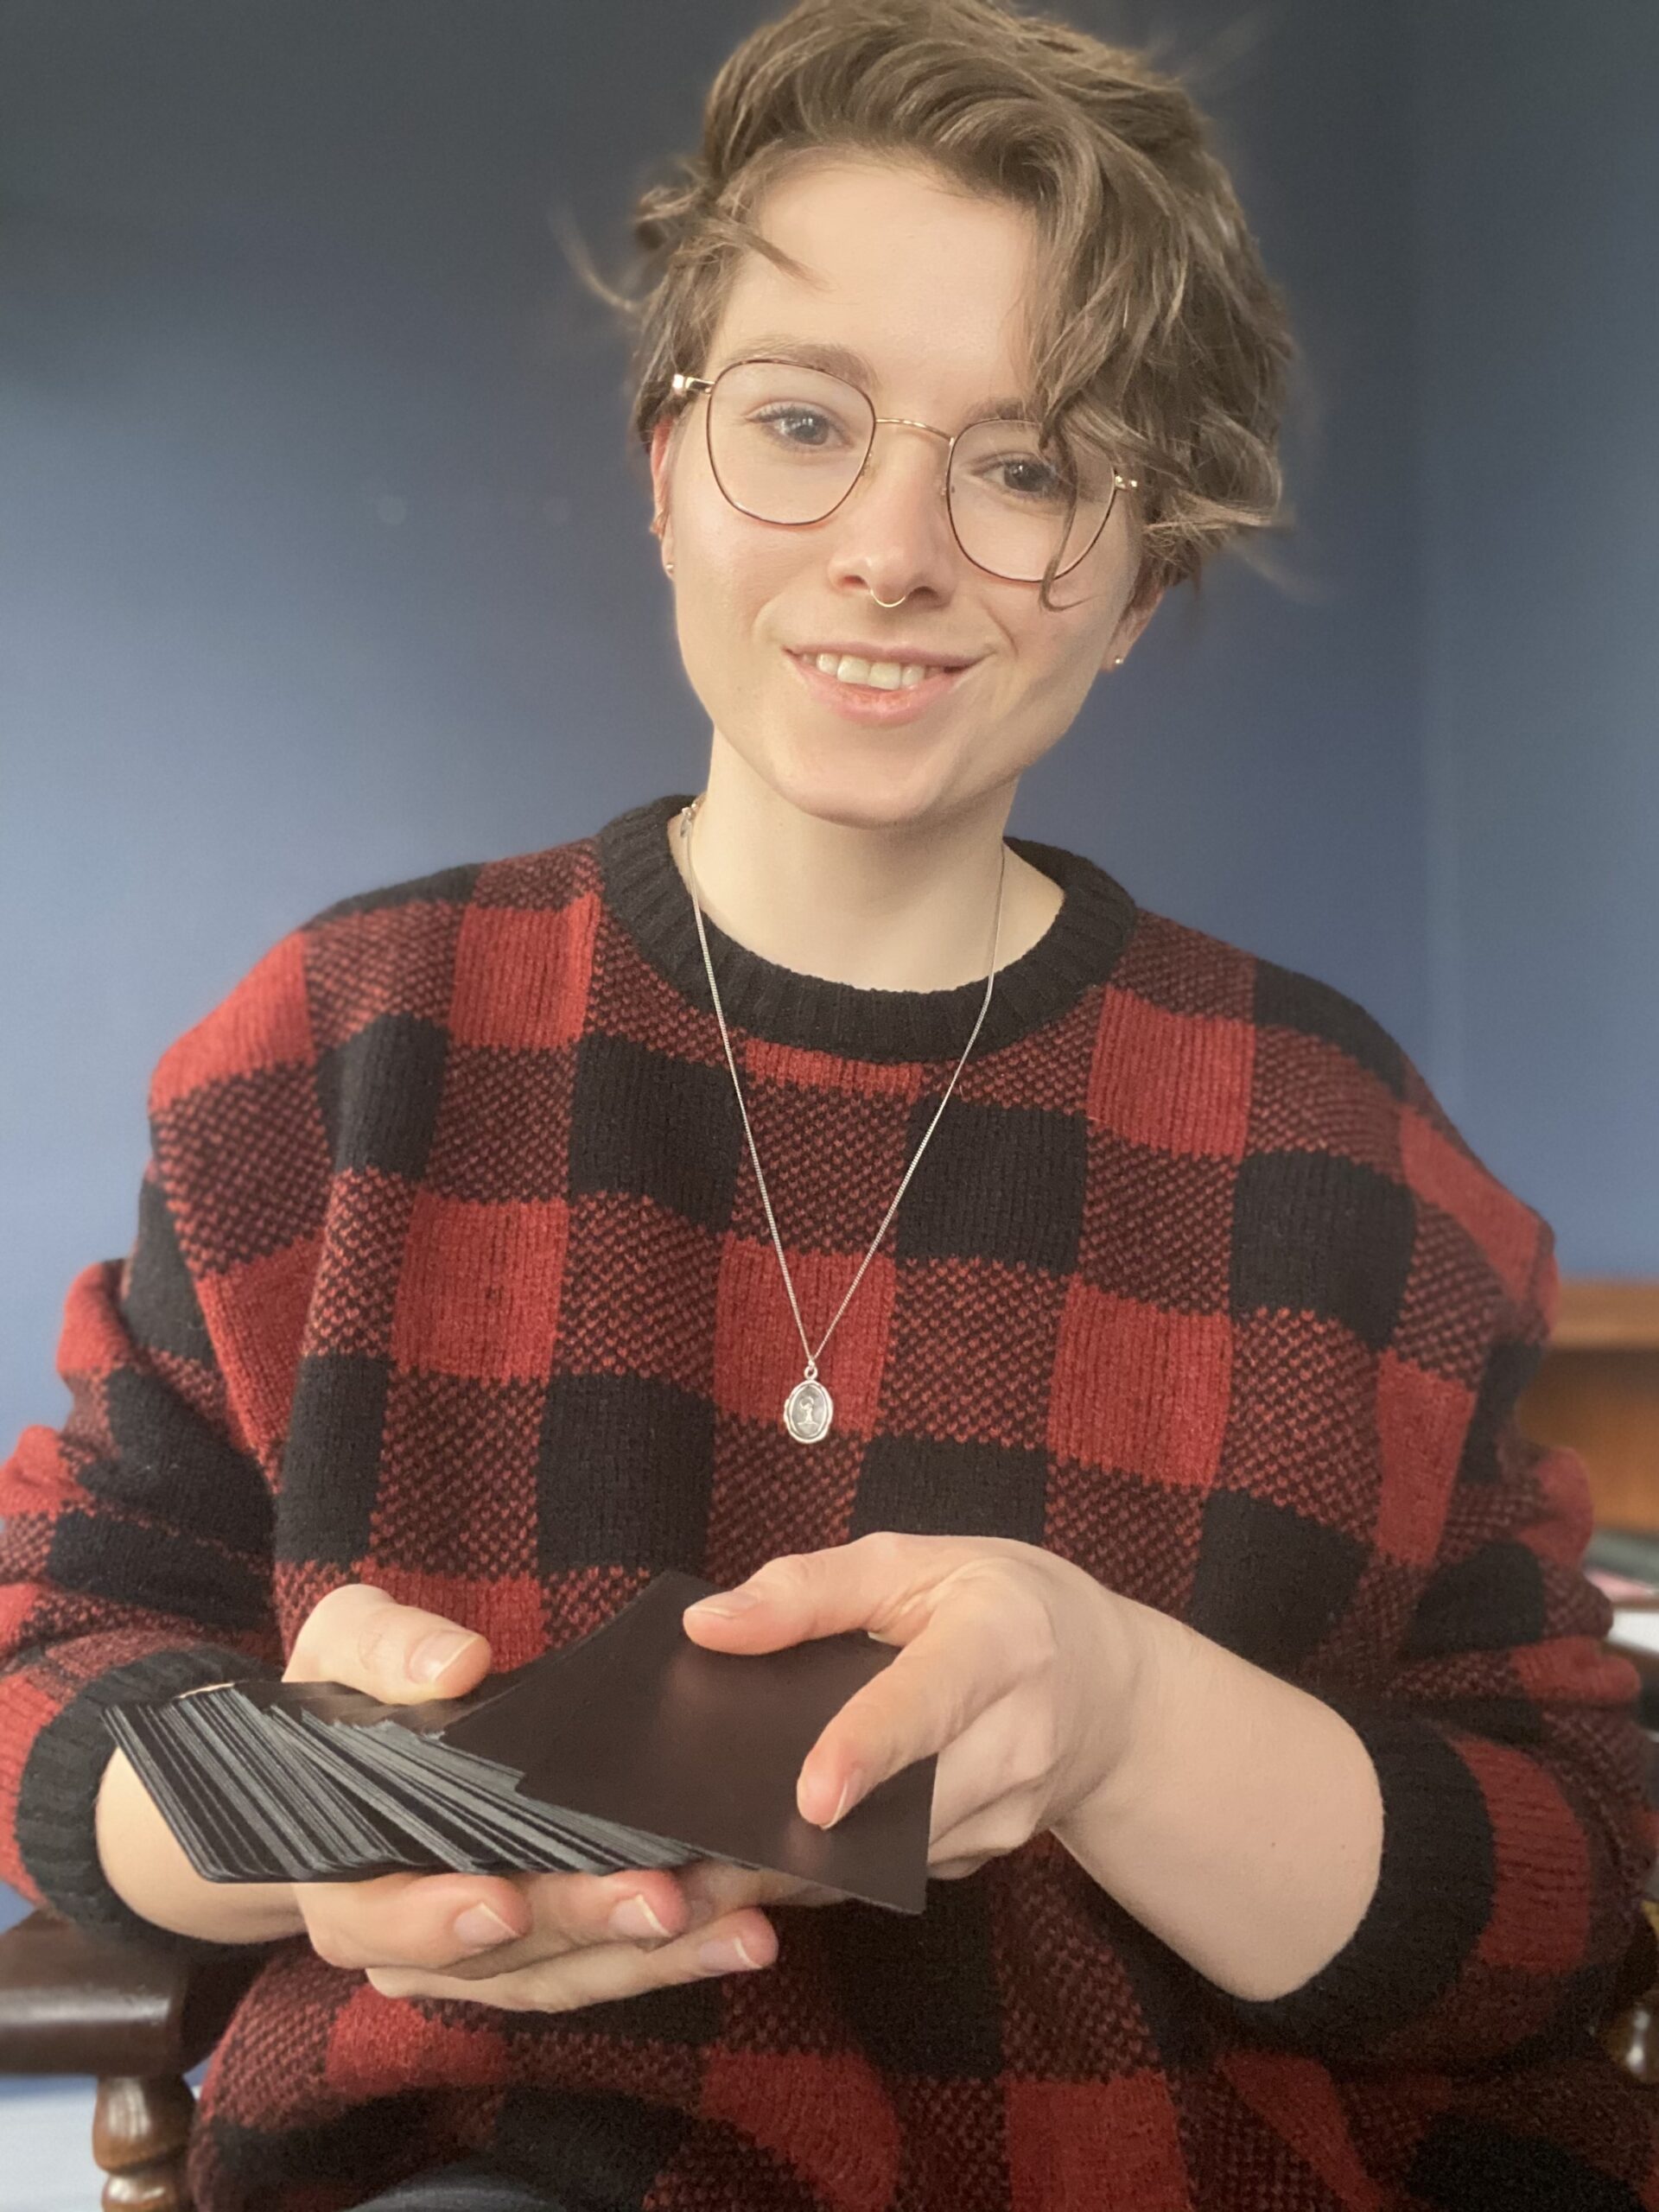 A picture of Lex wearing glasses and holding a deck of tarot cards. 